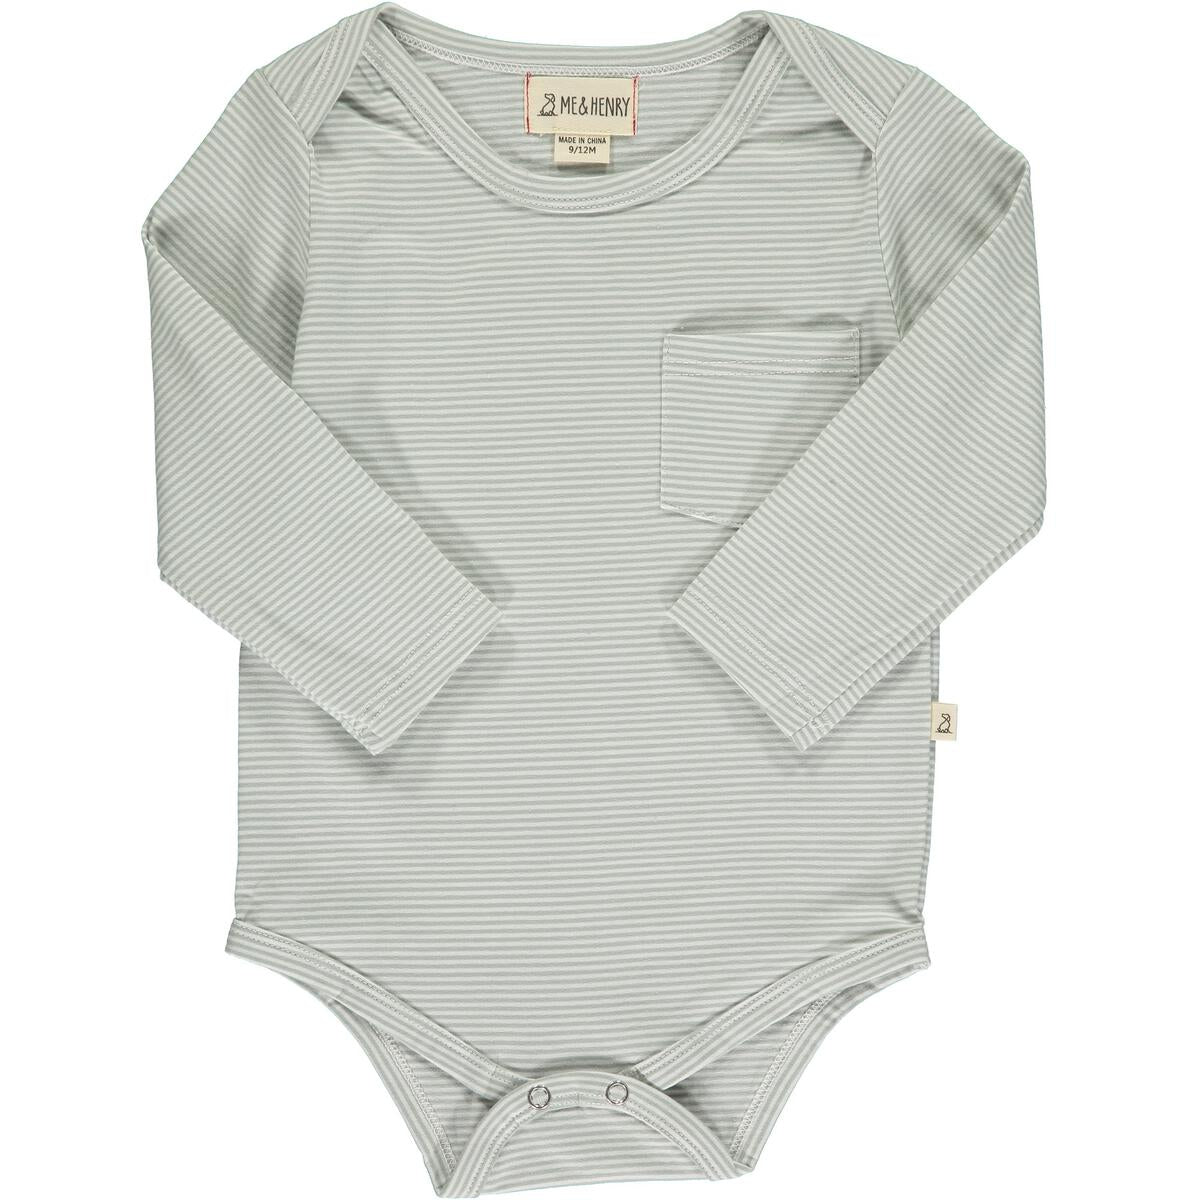 Tellico Long Sleeve Striped Onesies / Shirts | Assorted Colors